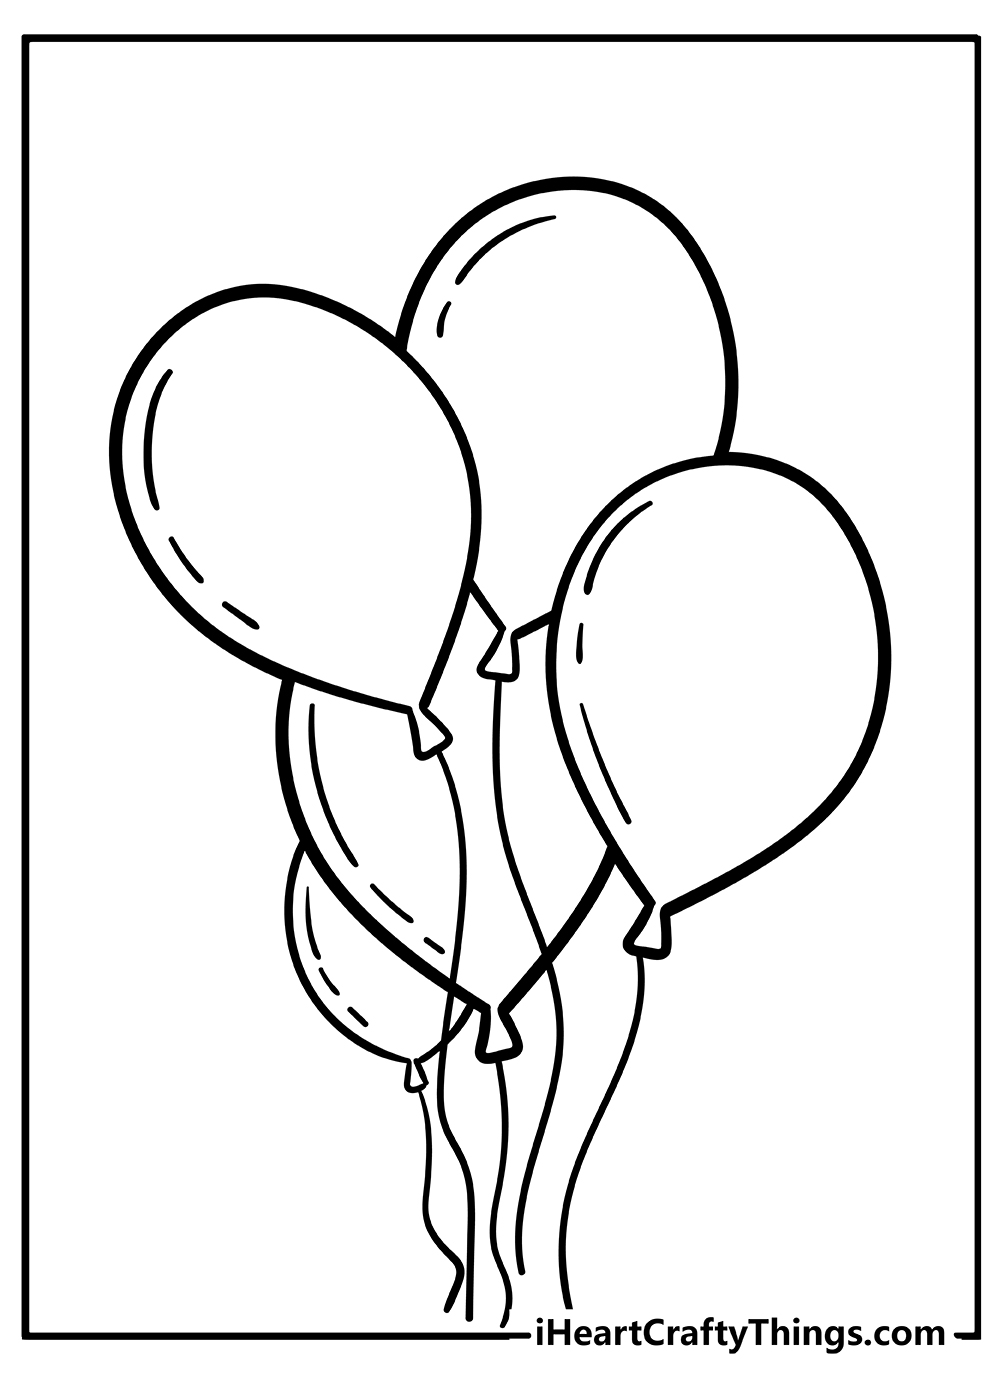 Balloons Coloring Pages free pdf download